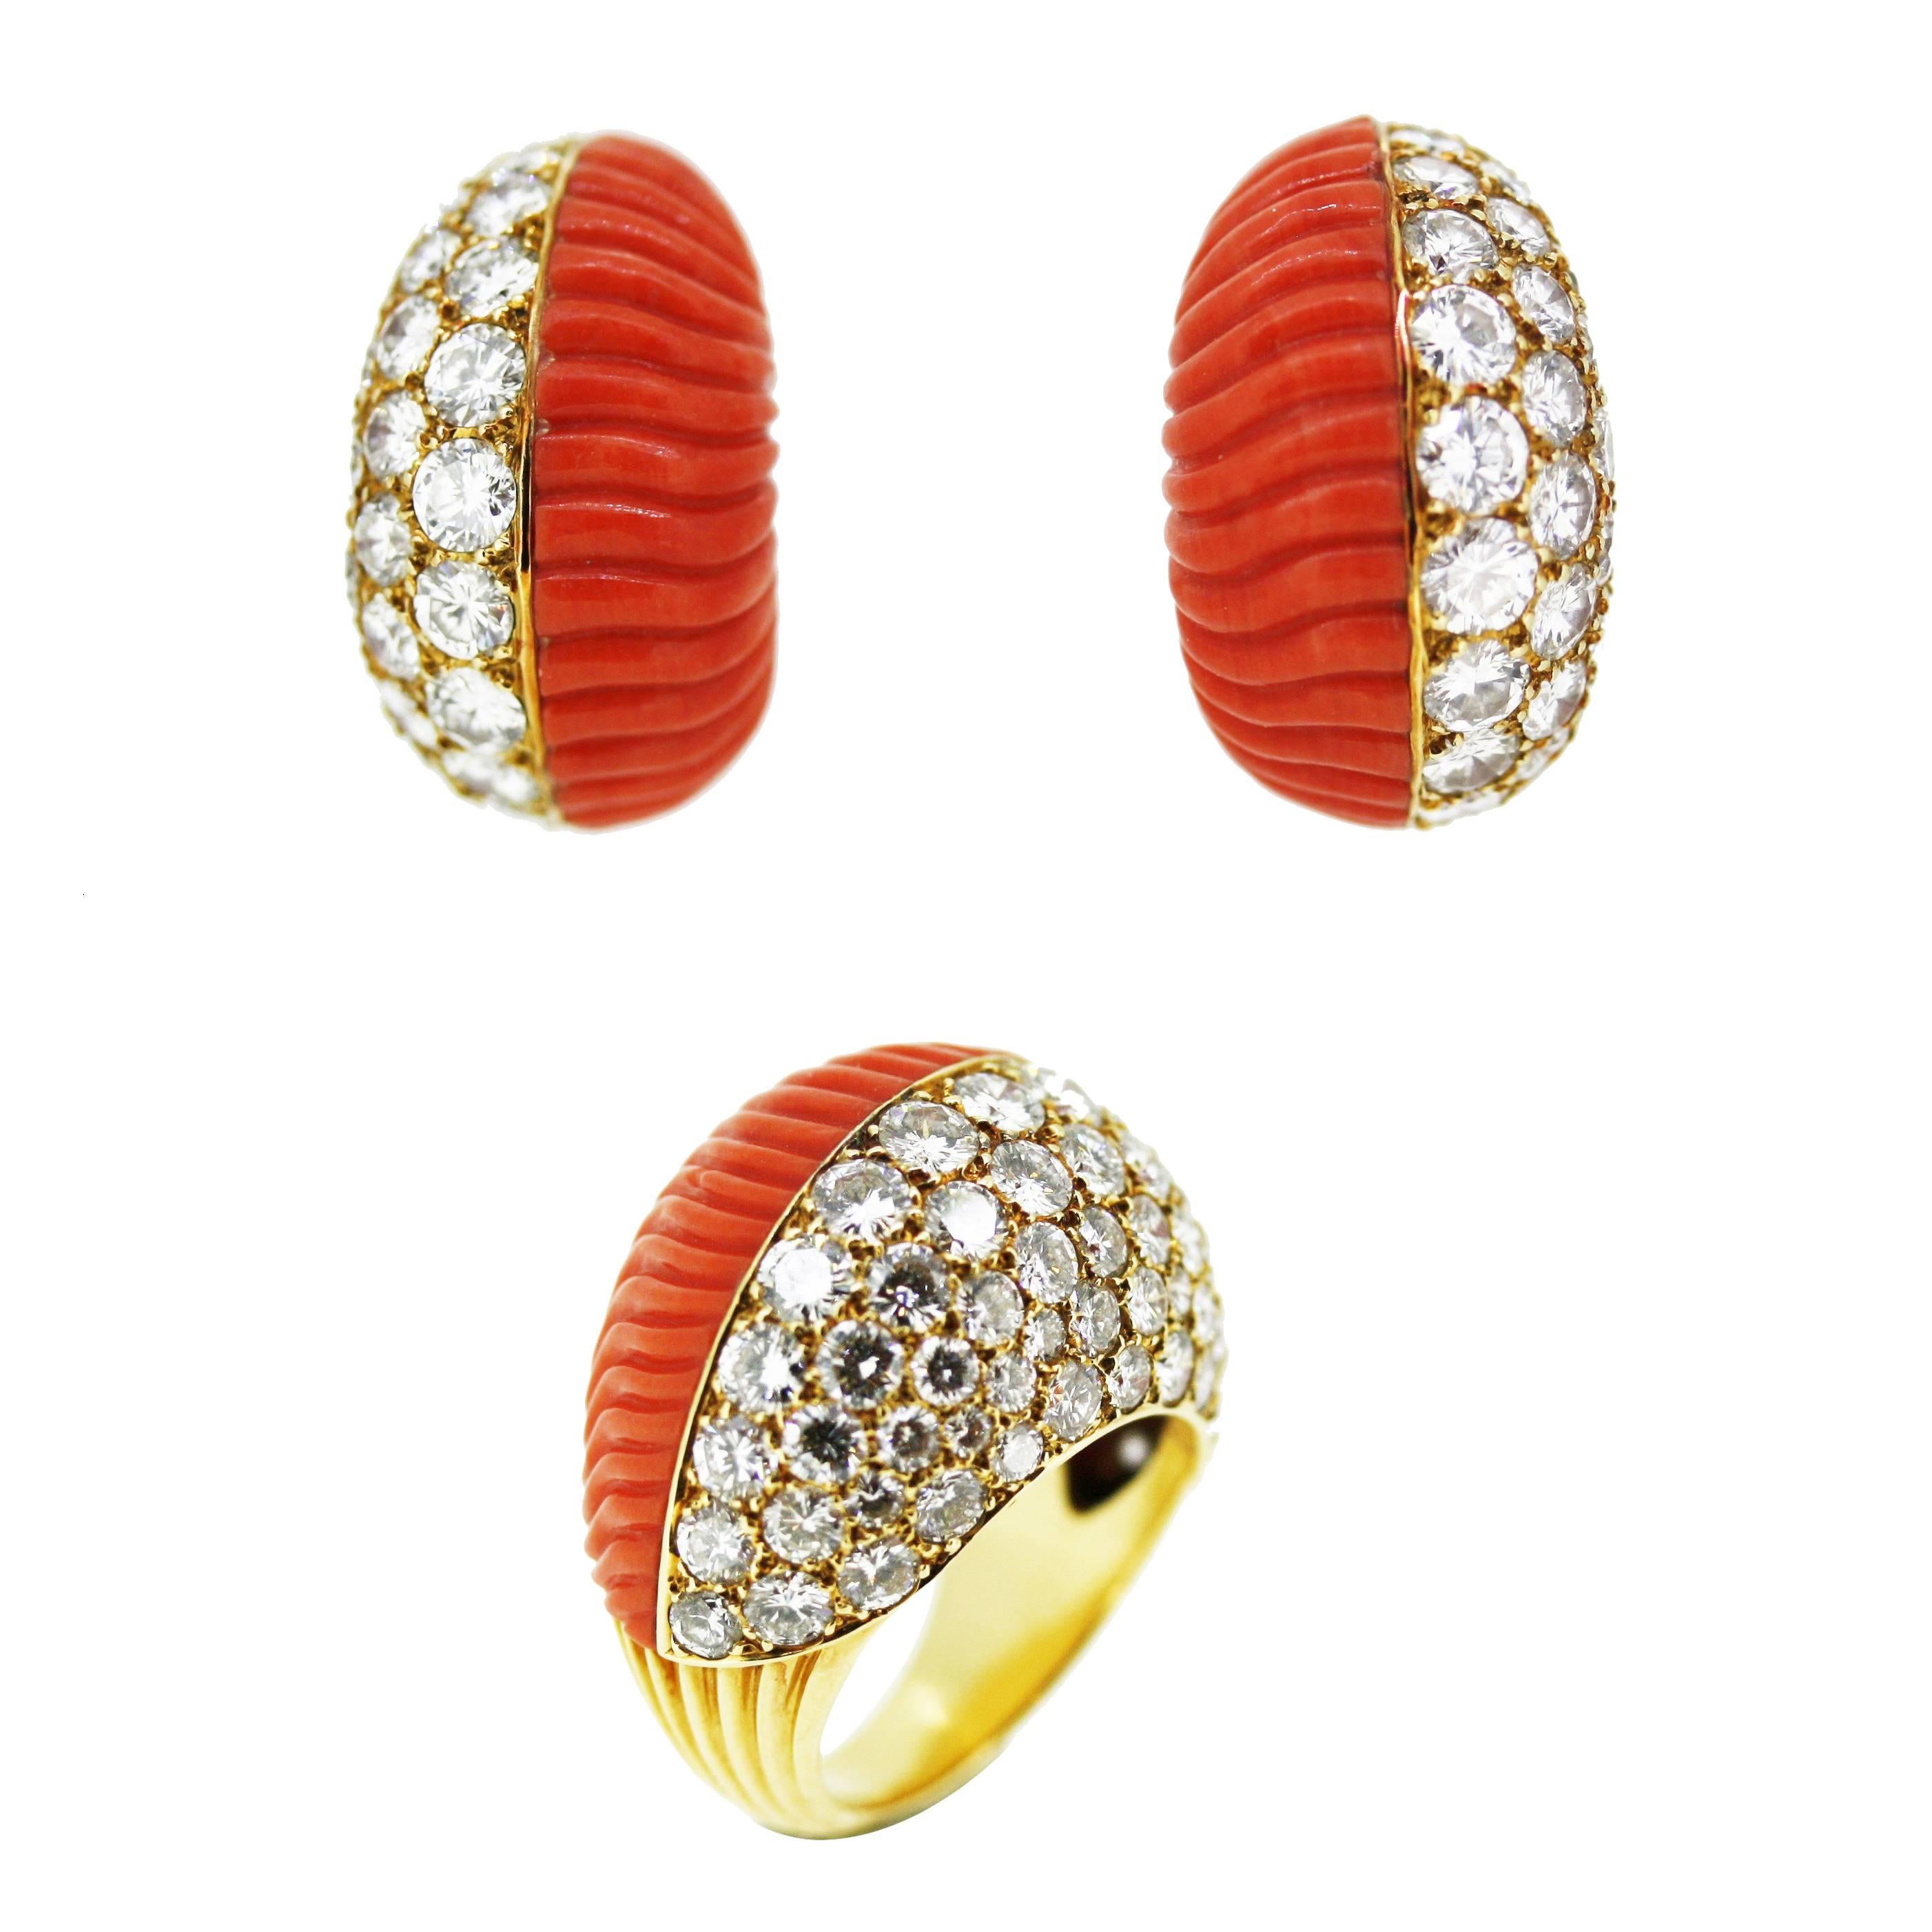 1960s Cartier Coral Diamond Gold Ring and Earrings For Sale